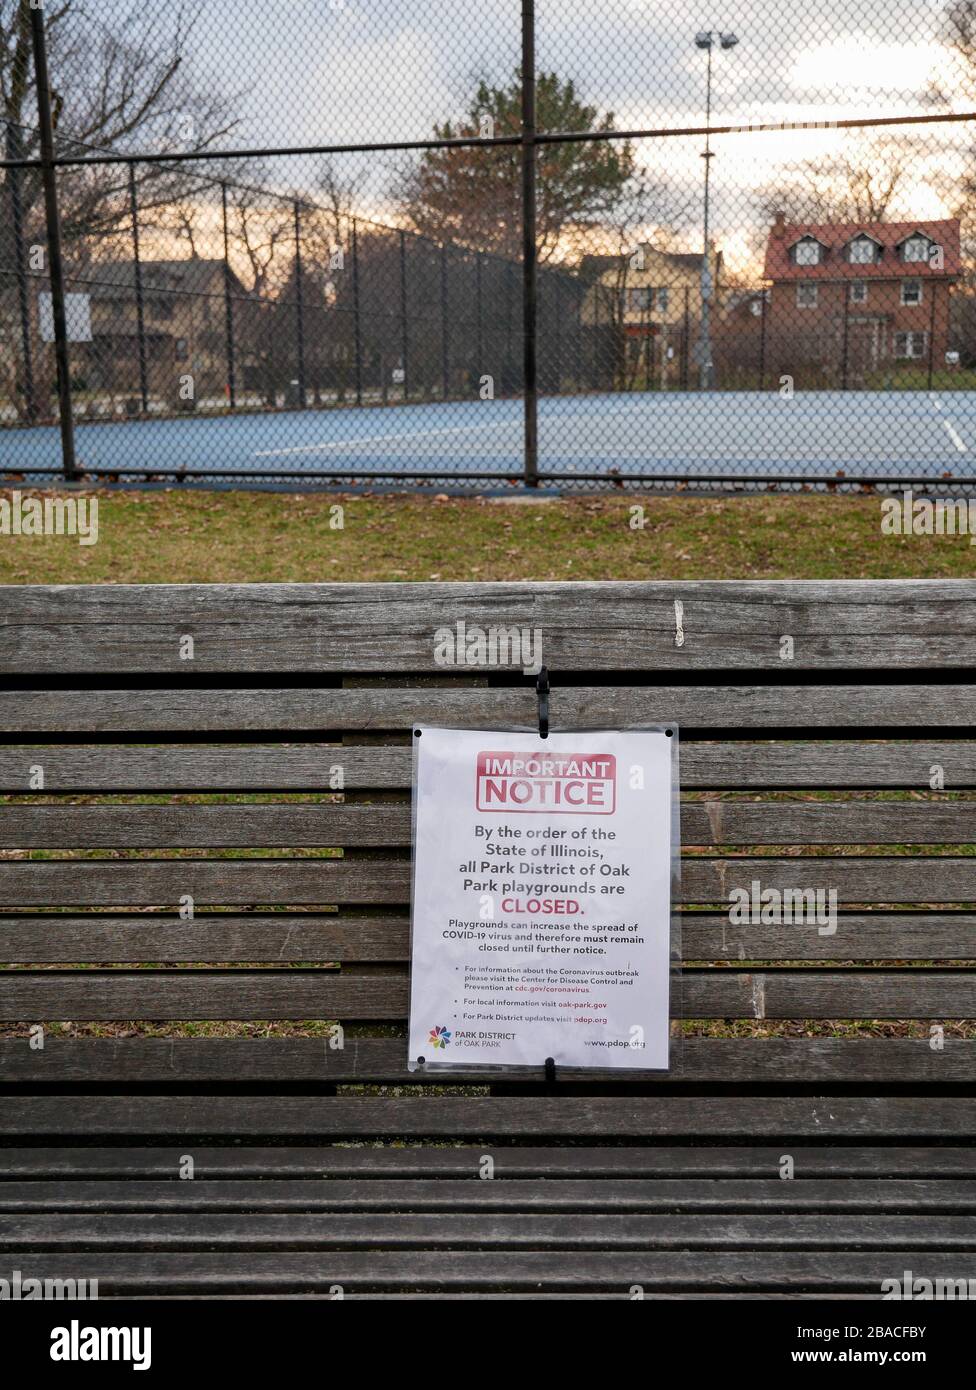 Oak Park, Illinois, USA. 25th March, 2020. Playground closed due to COVID-19 notice in Taylor Park. The closure includes tennis and other outdoor sports faciilities. Stock Photo